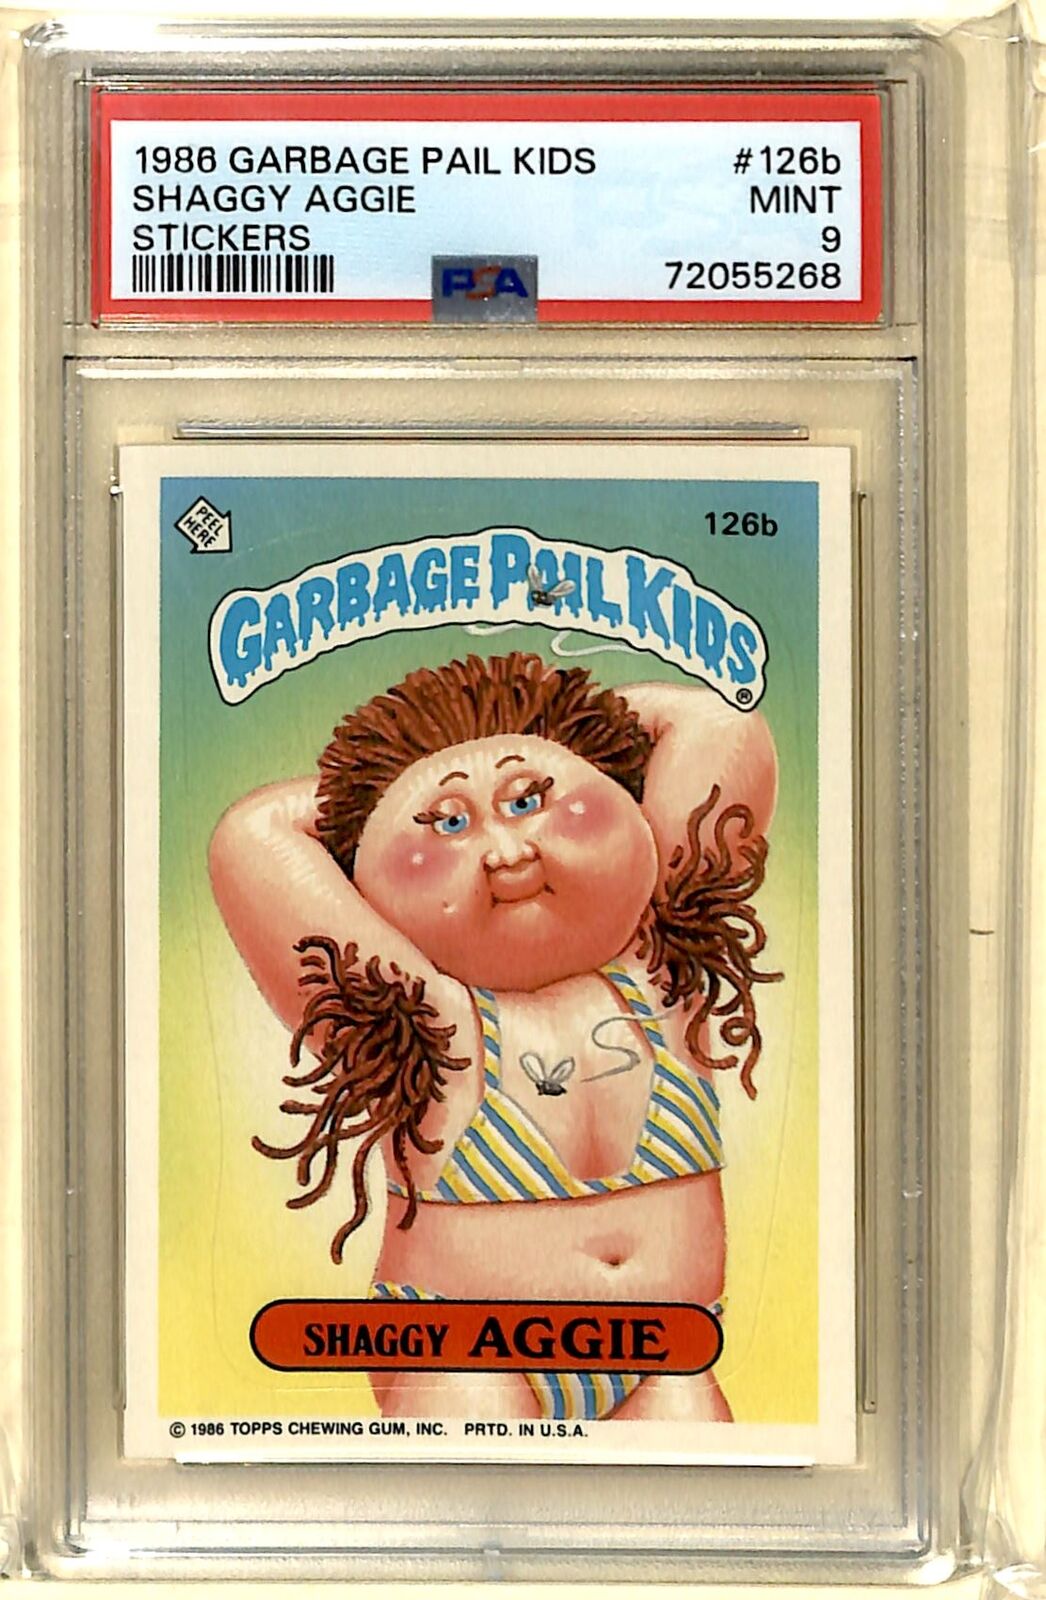 1986 Topps Garbage Pail Kids Series 4 Stickers Graded Shaggy Aggie PSA 9 #126B